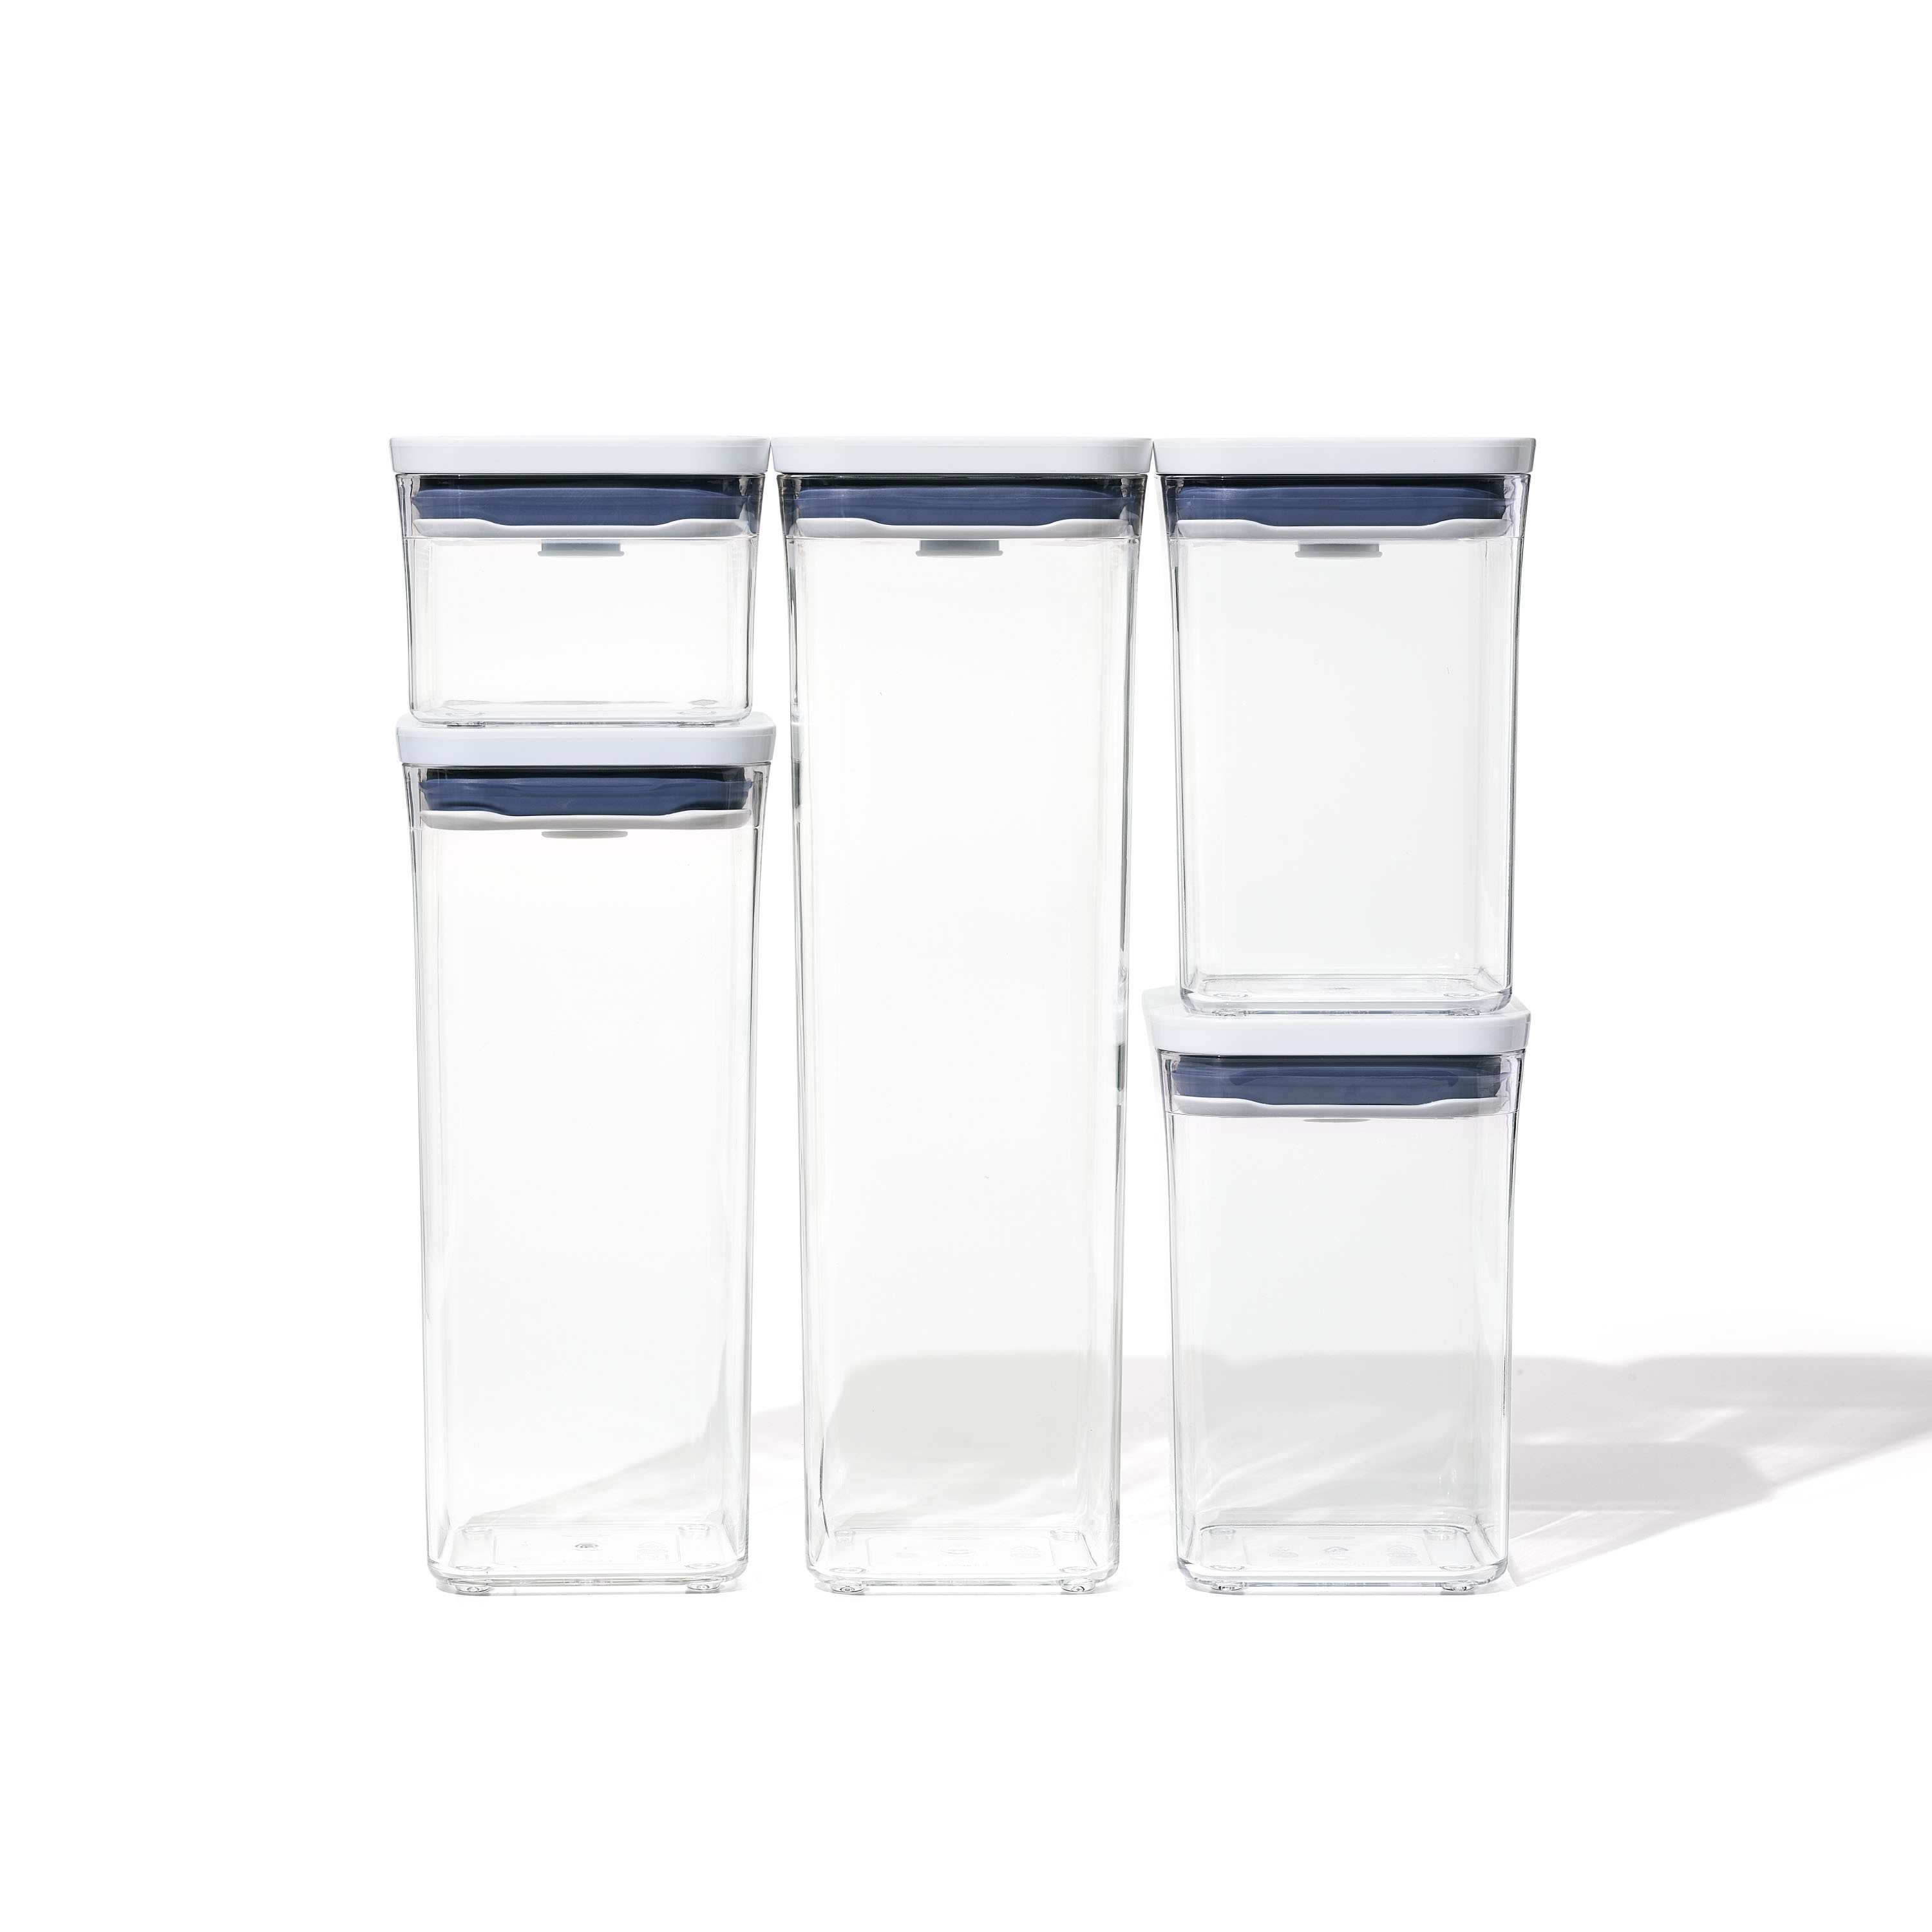 OXO 5-Pack Multisize Plastic Bpa-free Reusable Canister Set with